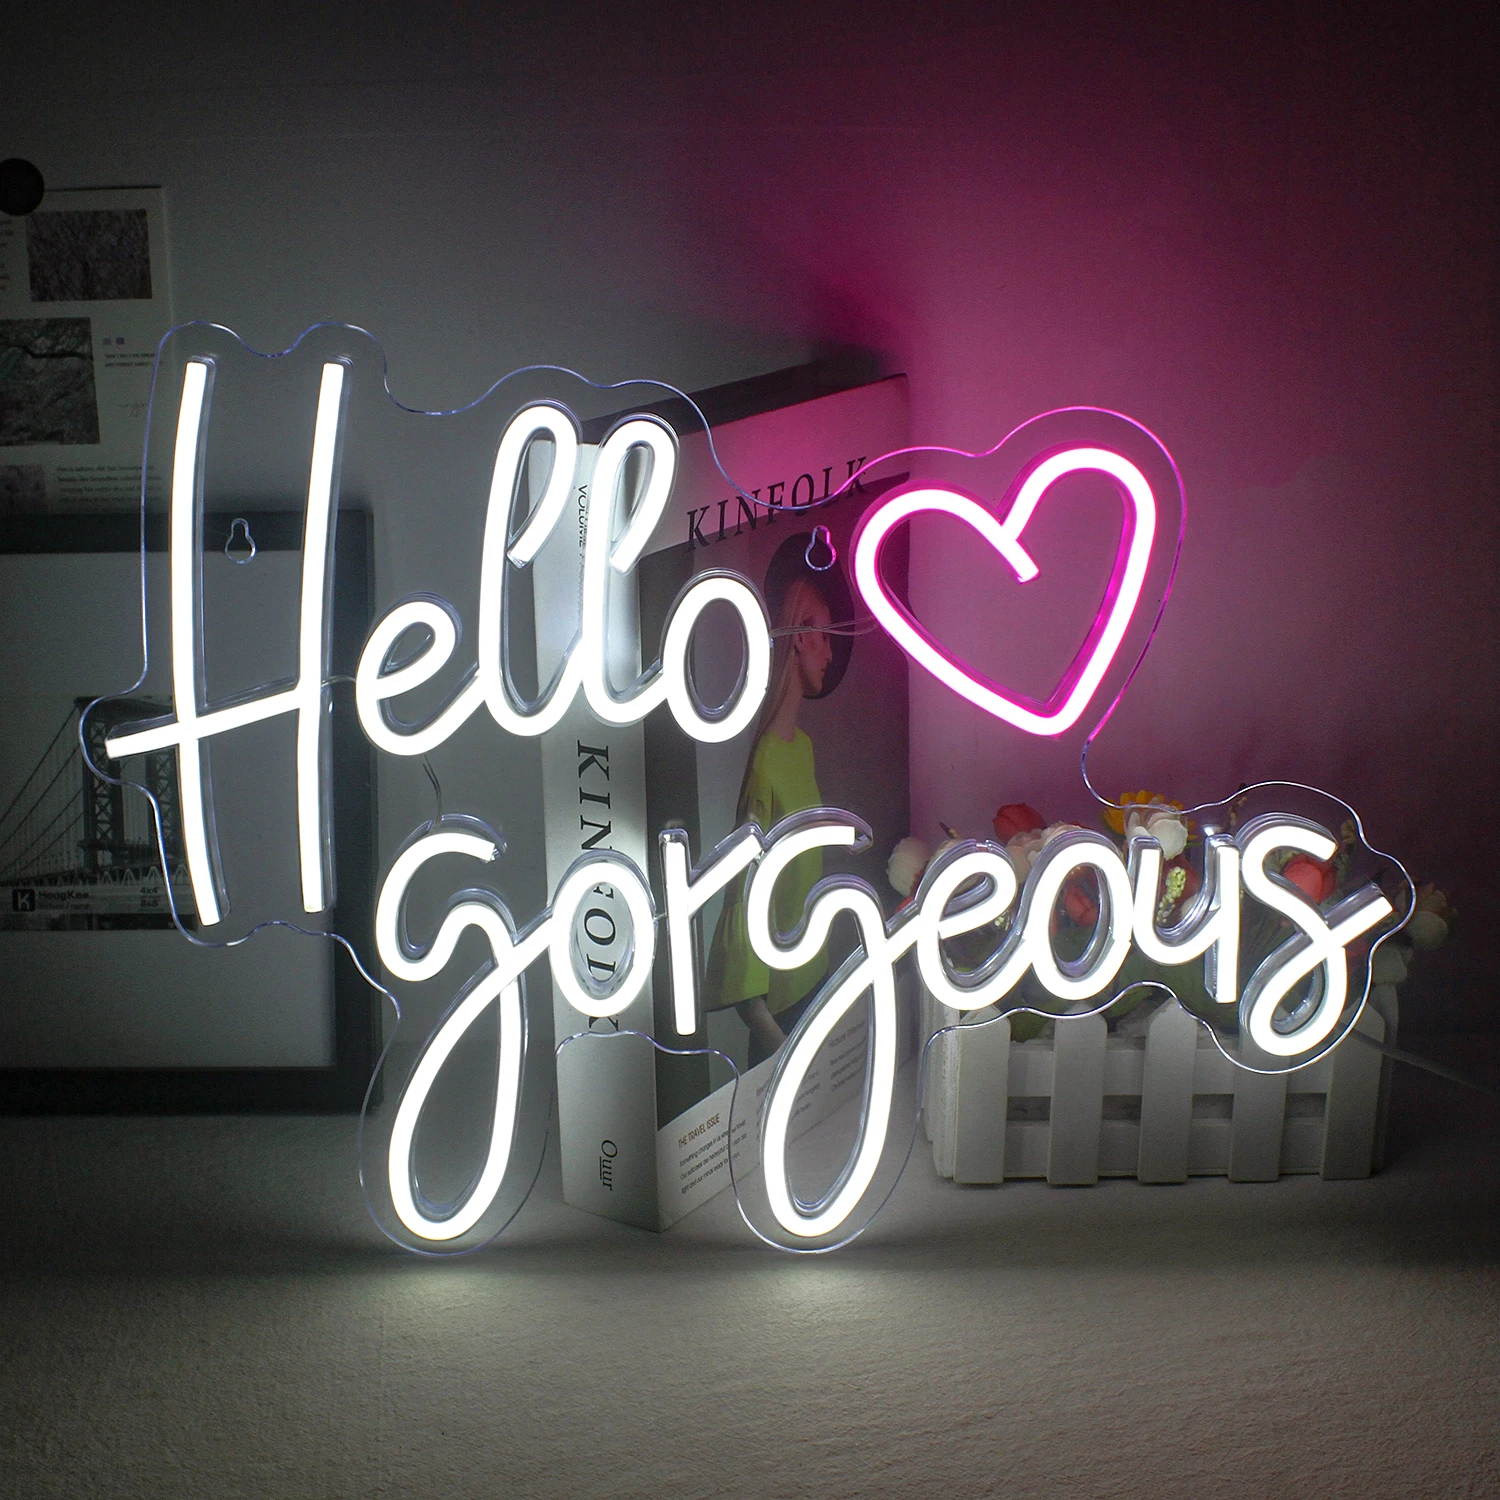 

Hello Gorgeous Neon Signs LED Light Up Sign for Cute Girls Bedroom Room Wall Decor for Party Wedding Decoration USB Powered